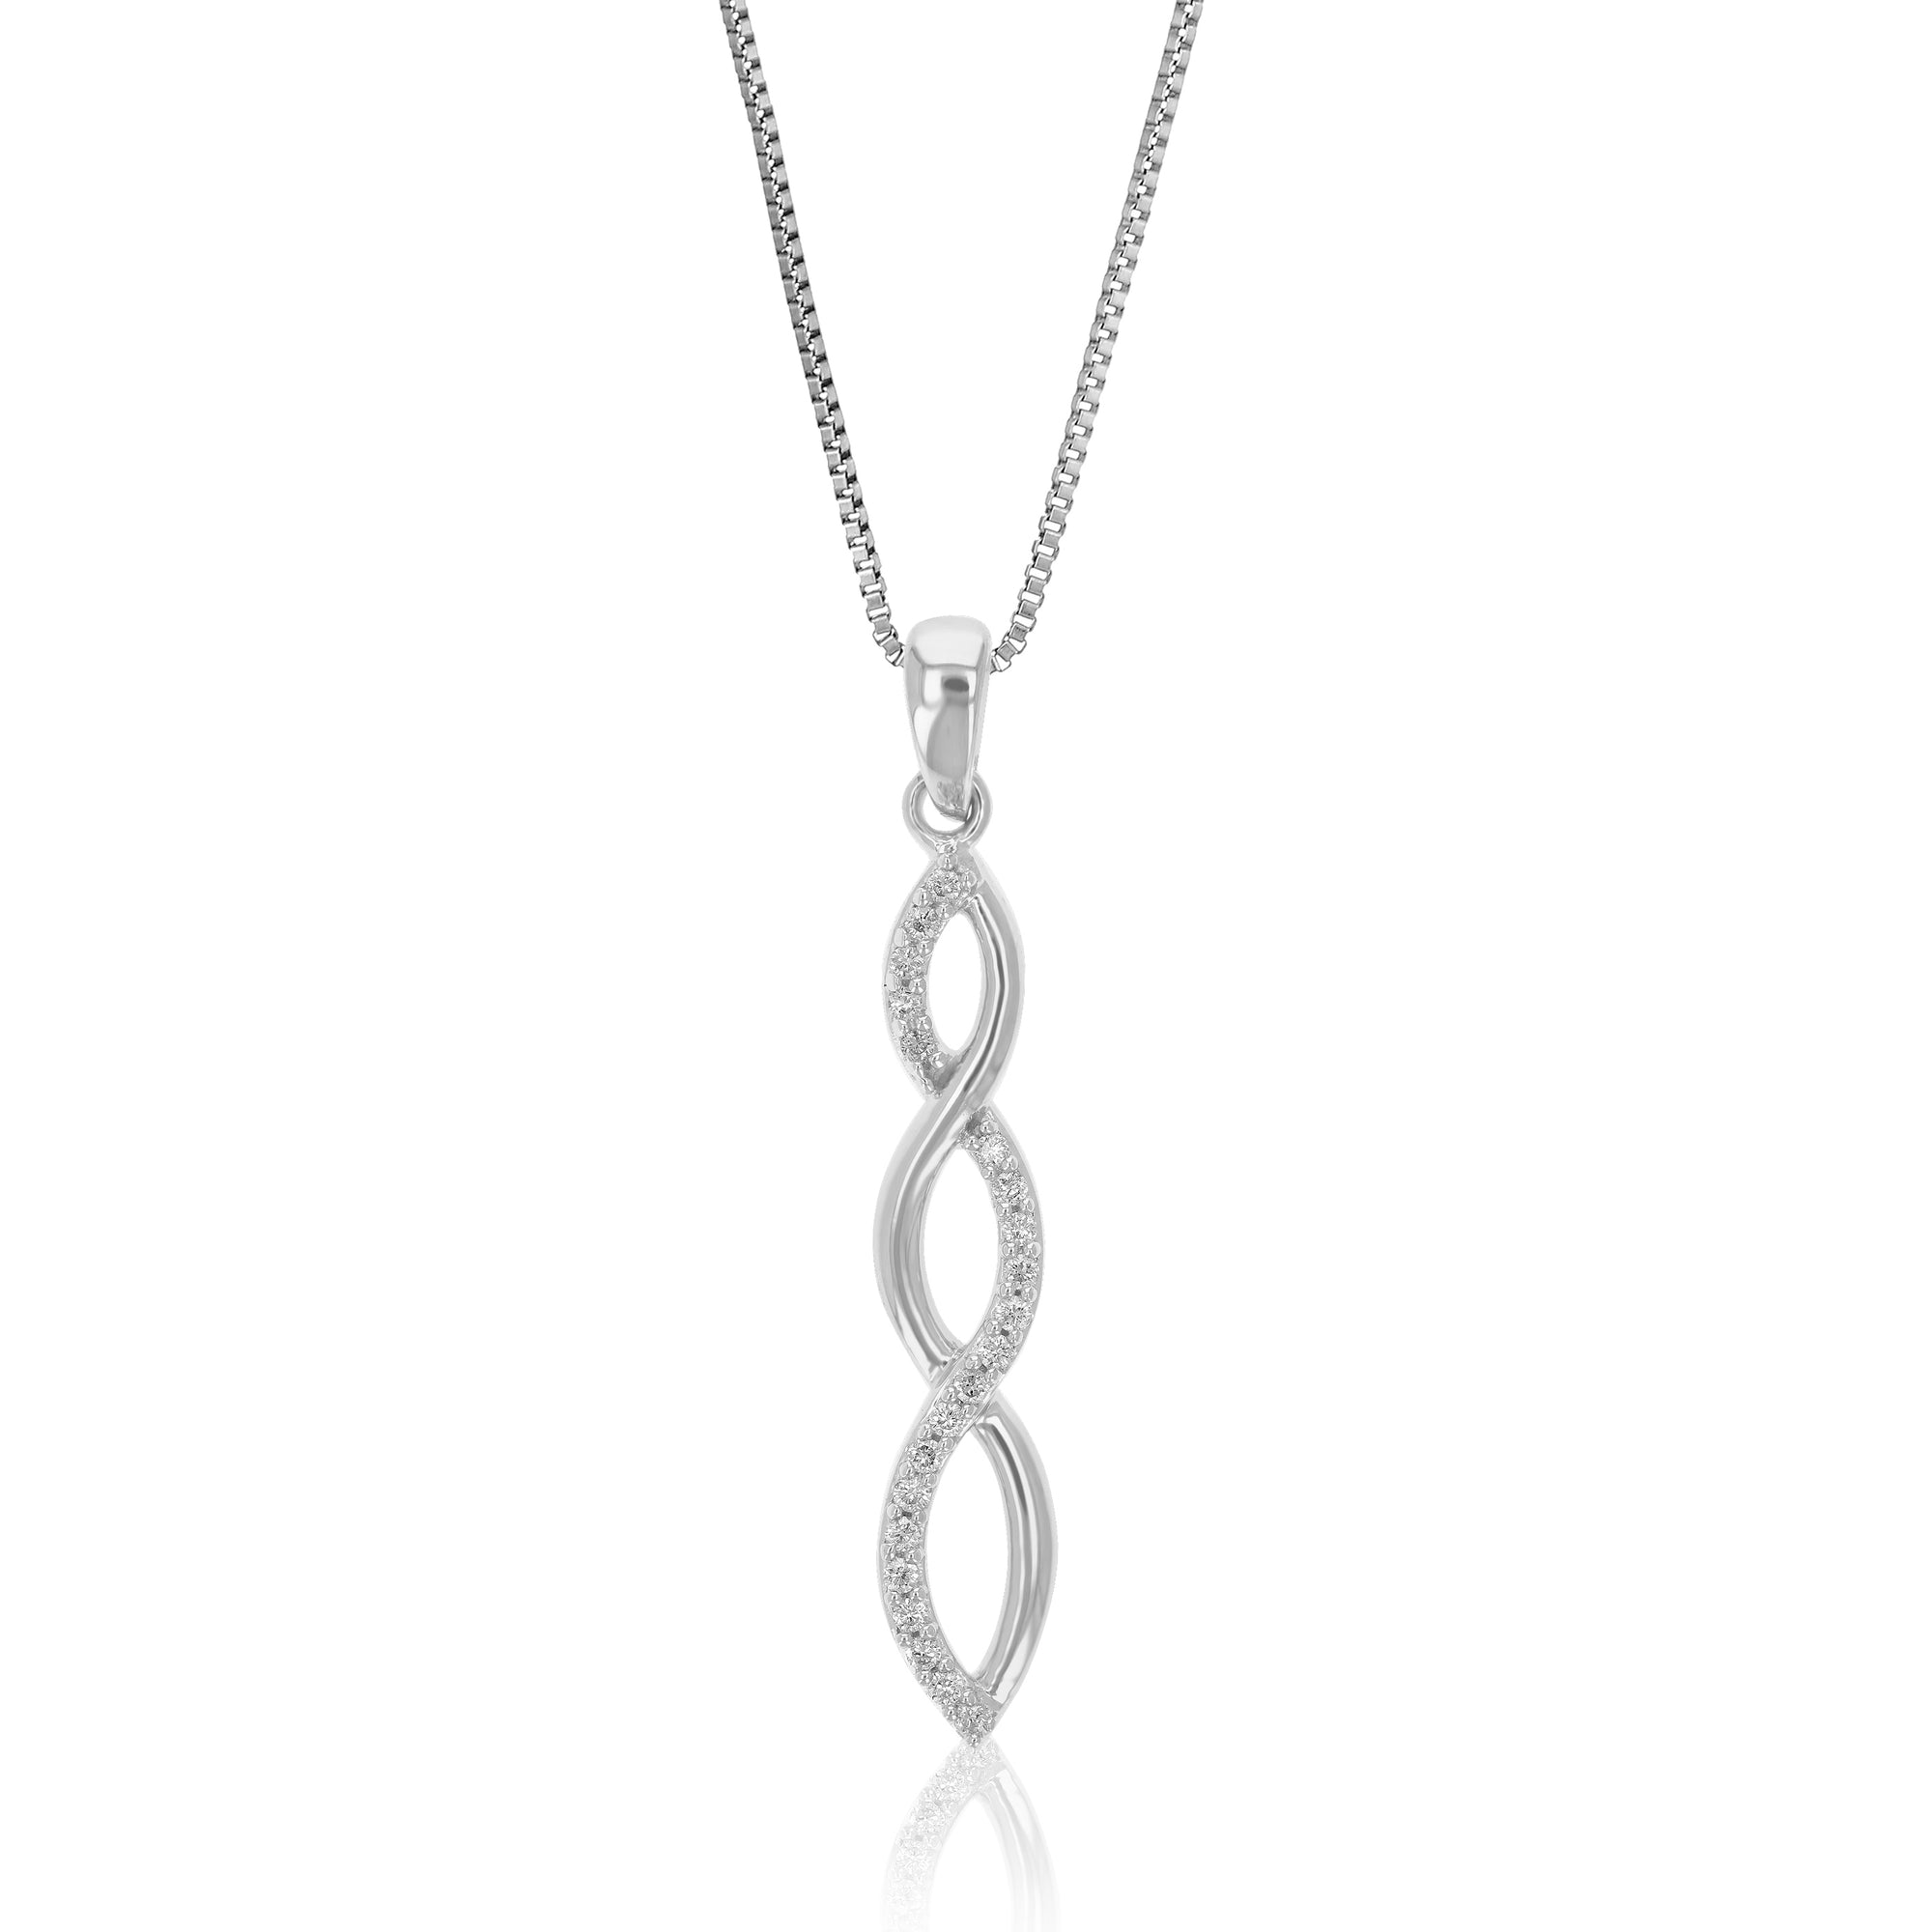 1/10 cttw Diamond Pendant Necklace for Women, Lab Grown Diamond Infinity Pendant Necklace in .925 Sterling Silver with Chain, Size 1 1/4 Inch